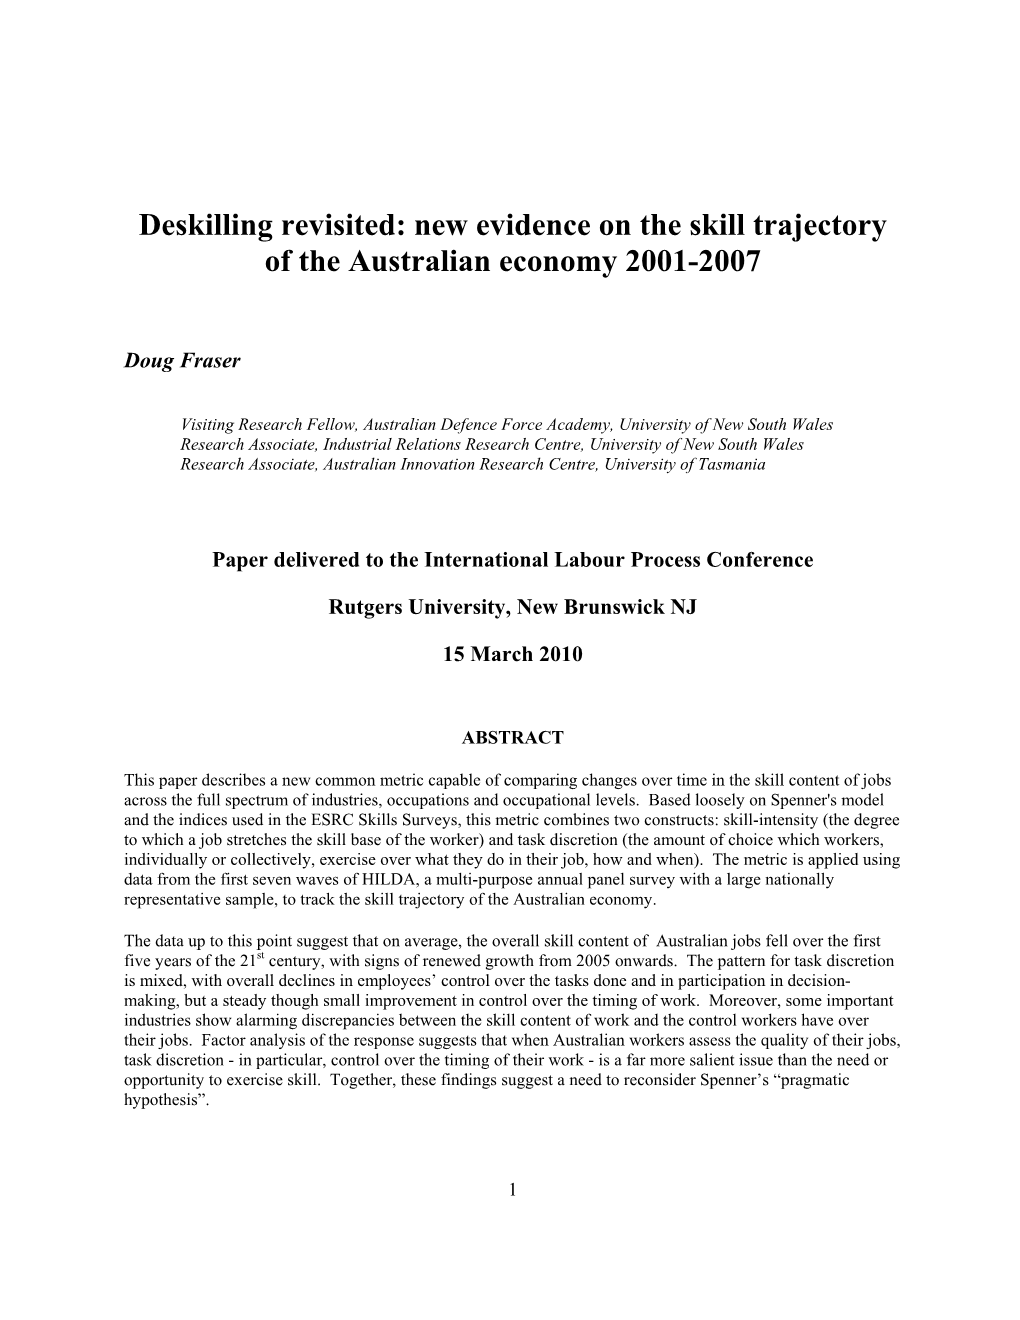 Deskilling Revisited: New Evidence on the Skill Trajectory of the Australian Economy 2001-2007